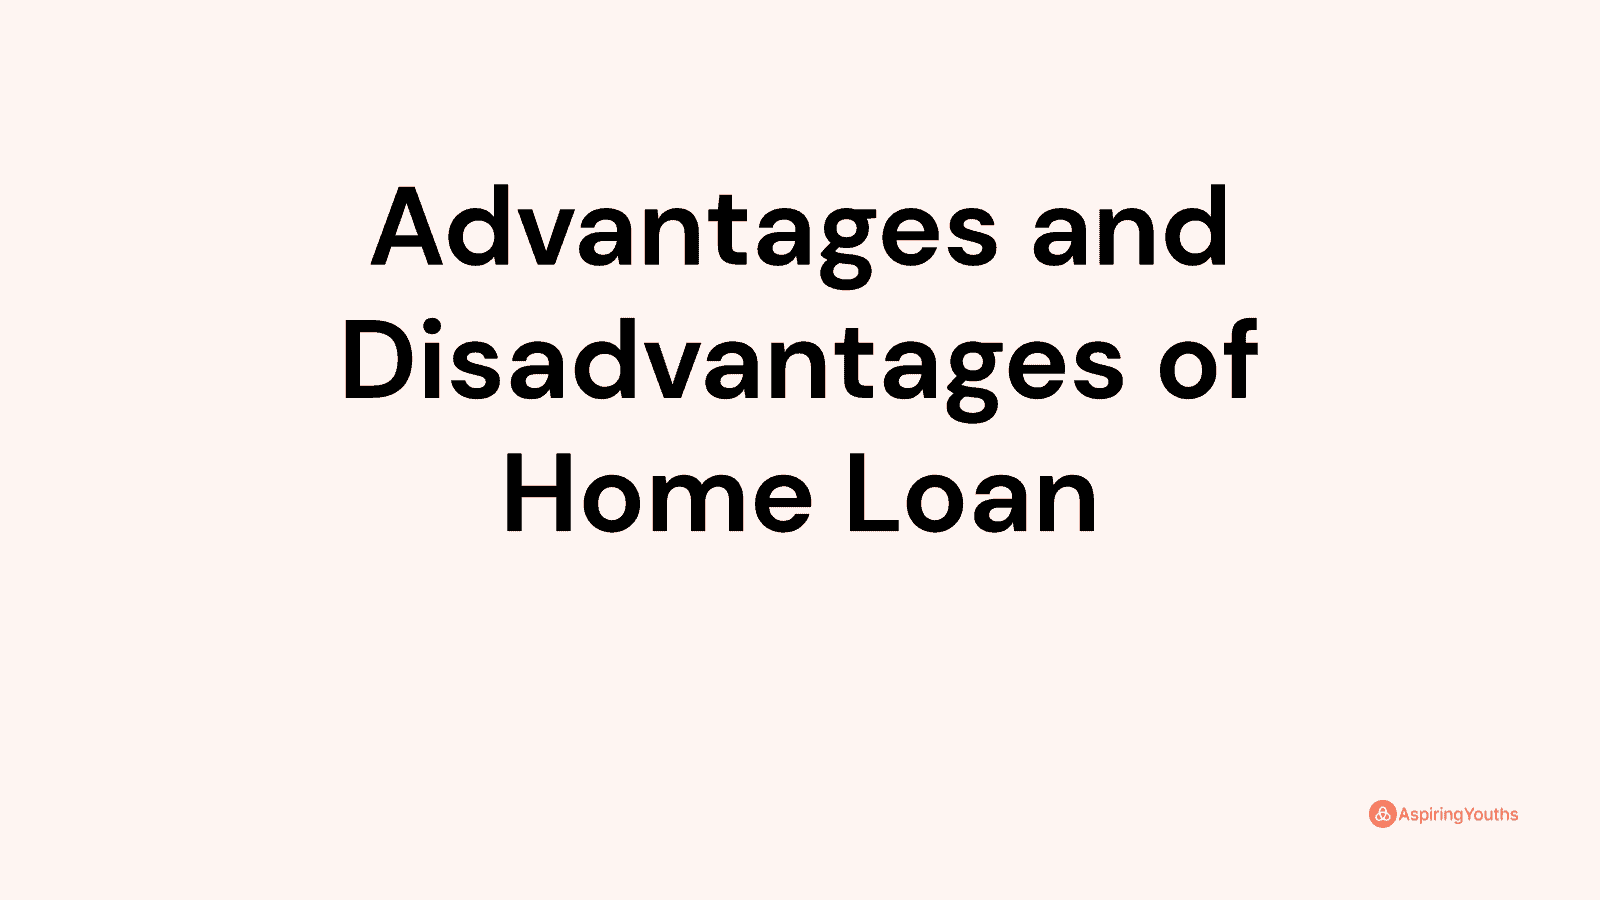 Advantages and disadvantages of Home Loan